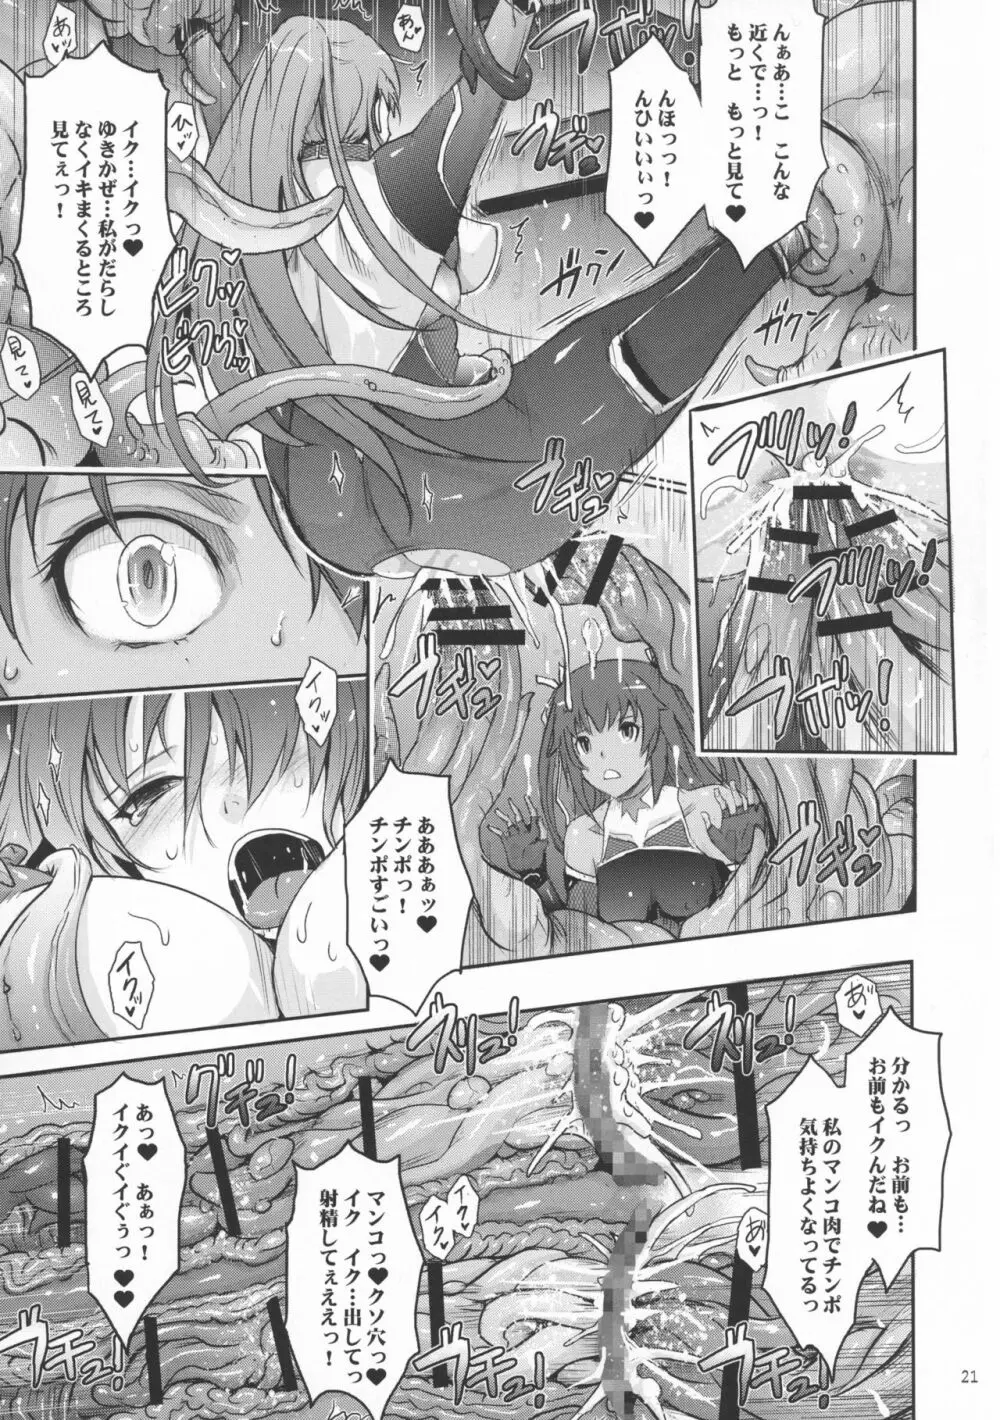 TENTACLES 隷嬢秋山凛子の蜜箱 Page.21